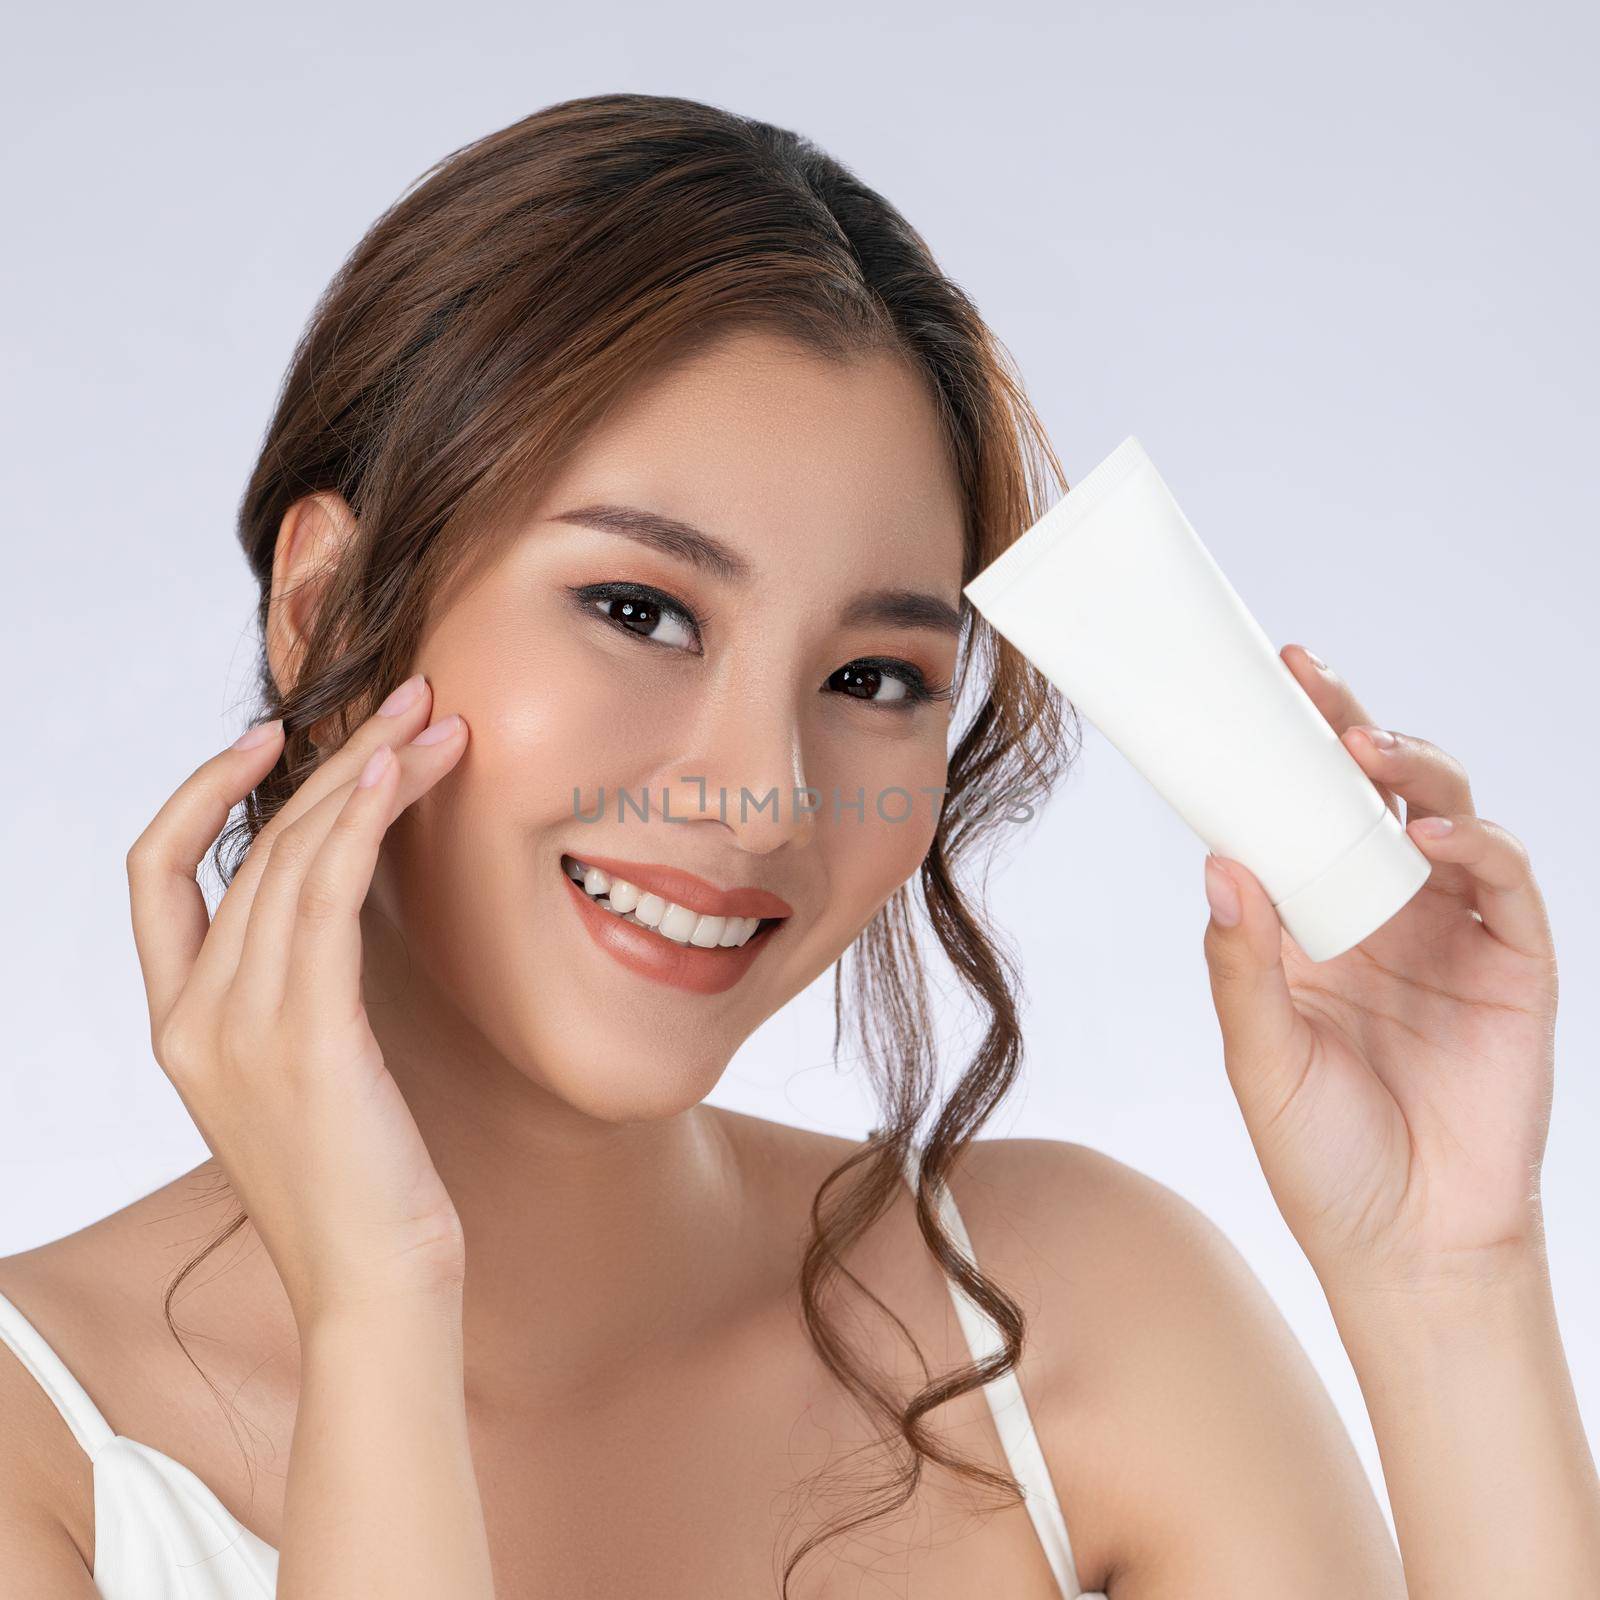 Gorgeous woman with makeup smiling holding mockup product for advertising. by biancoblue